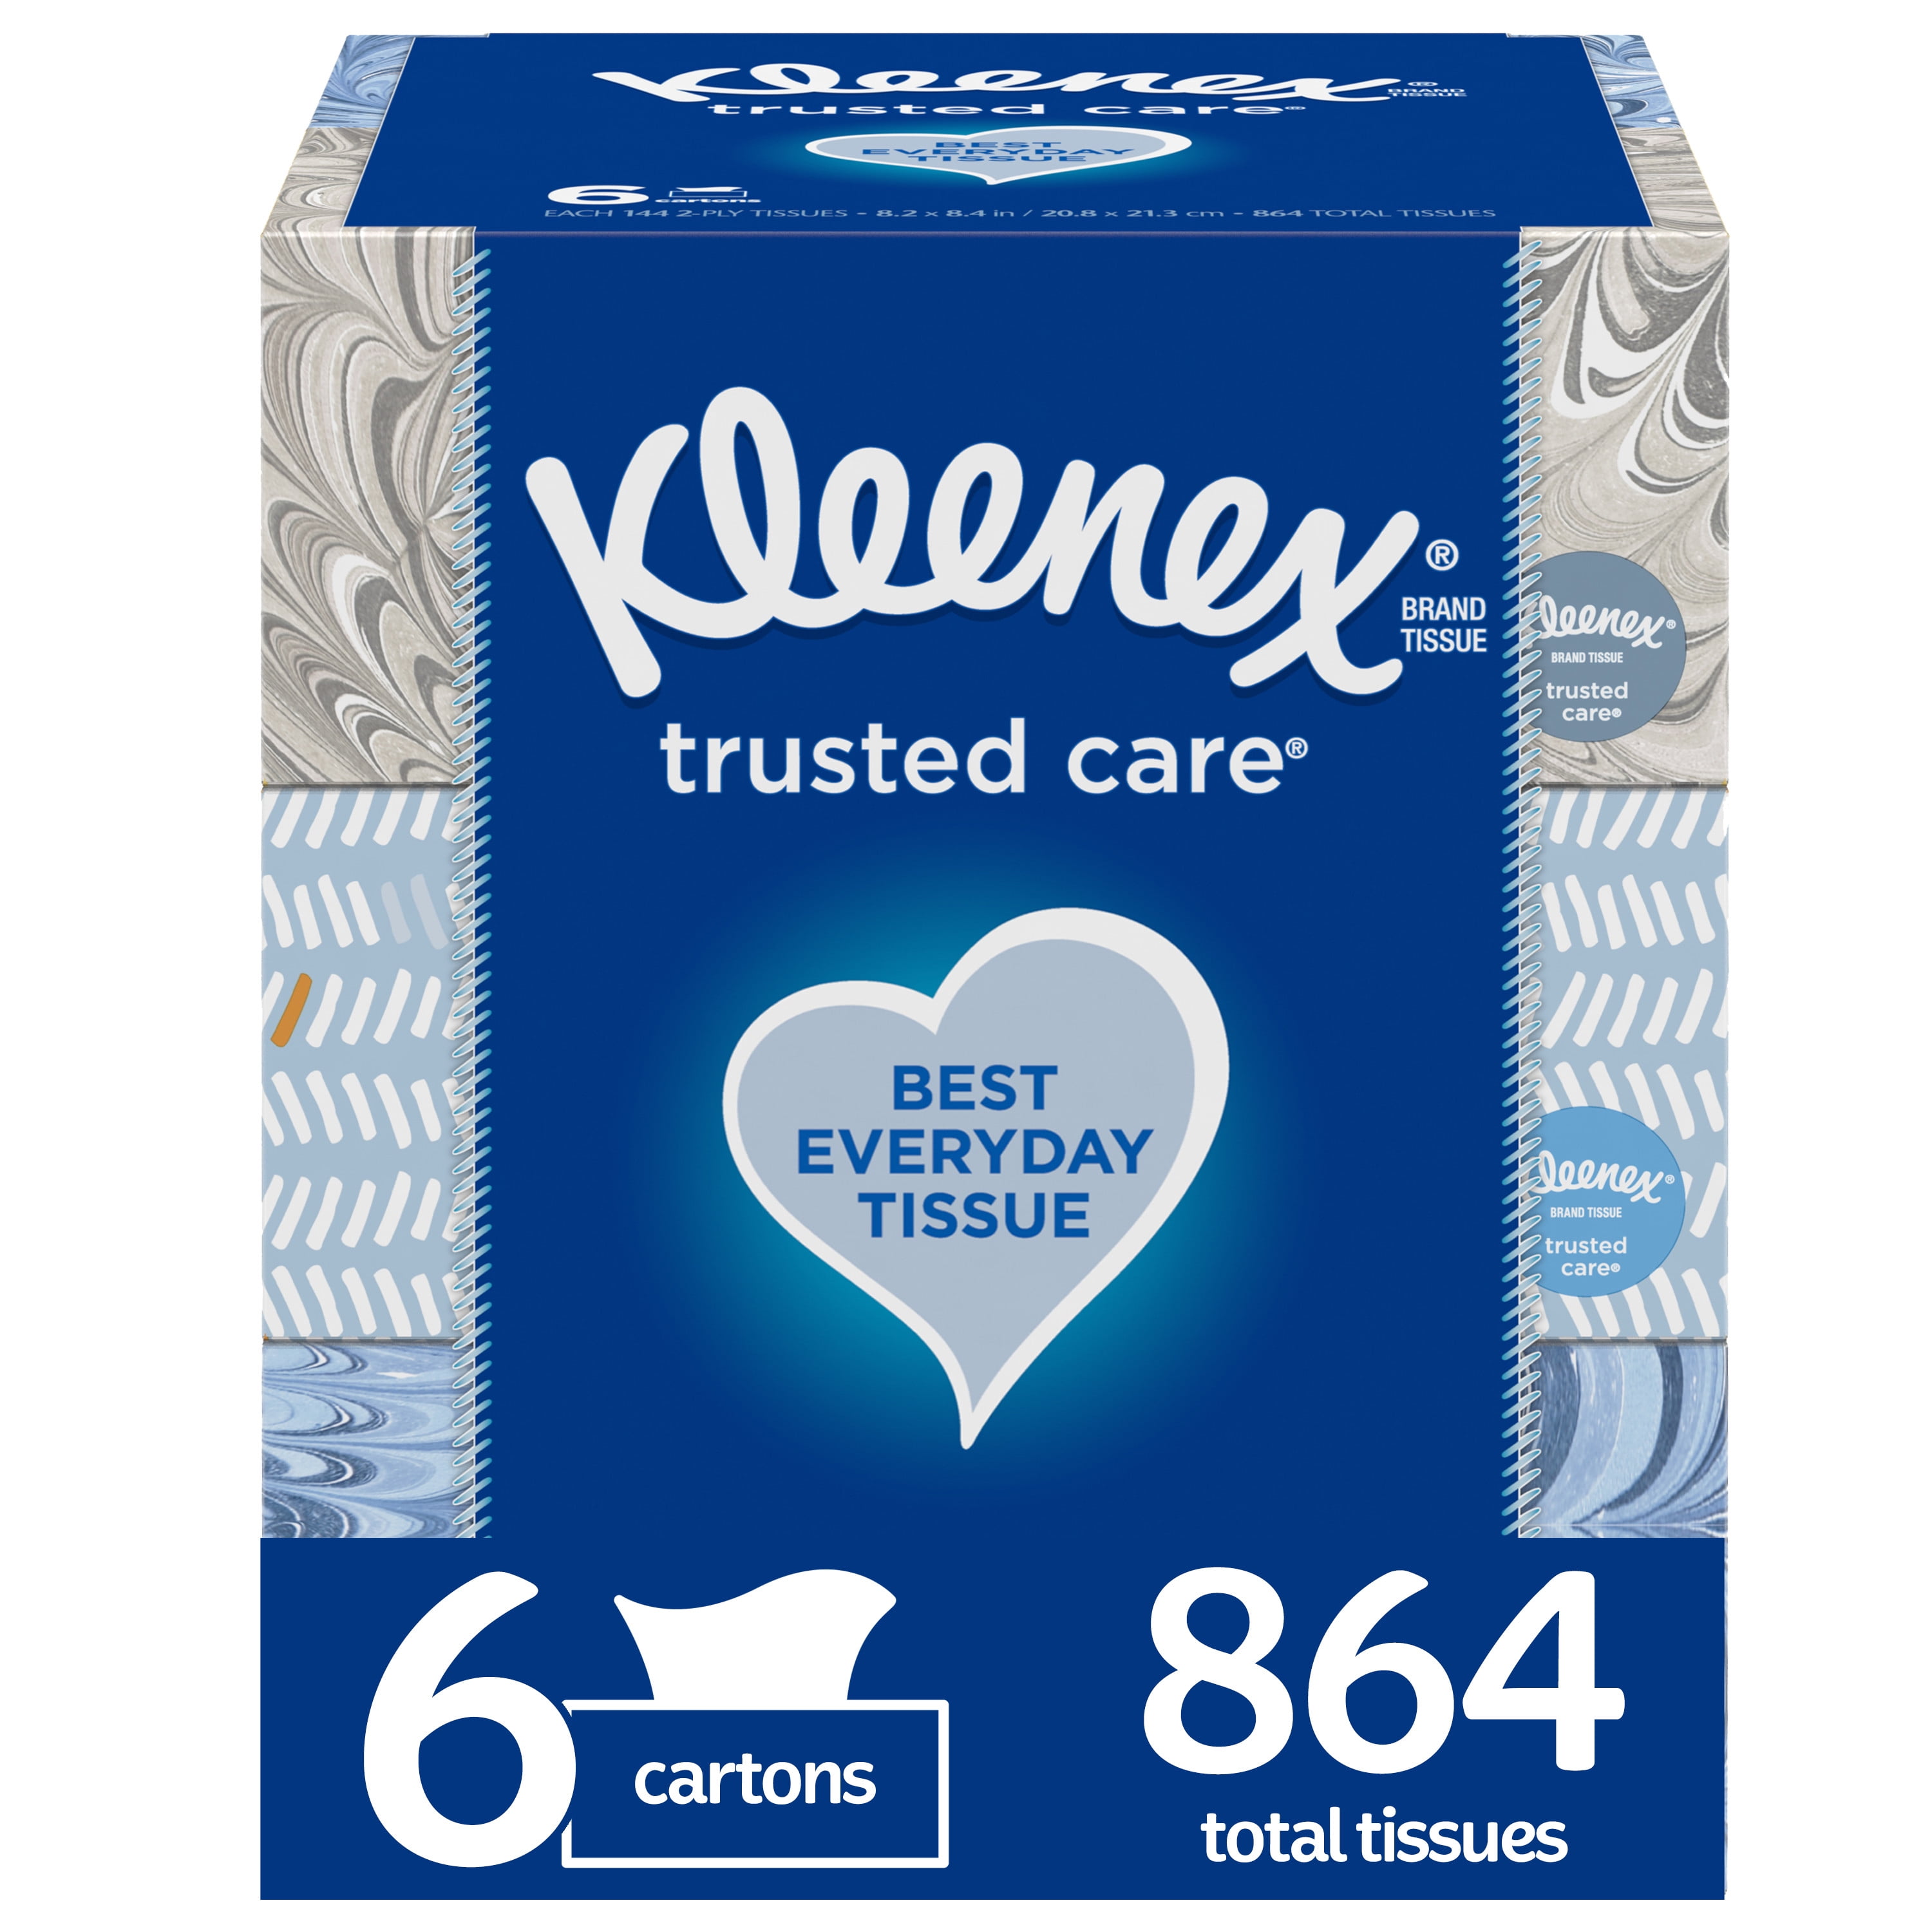 576 Total Tissues 4 Flat Boxes Kleenex Everyday Trusted Care Facial Tissues 